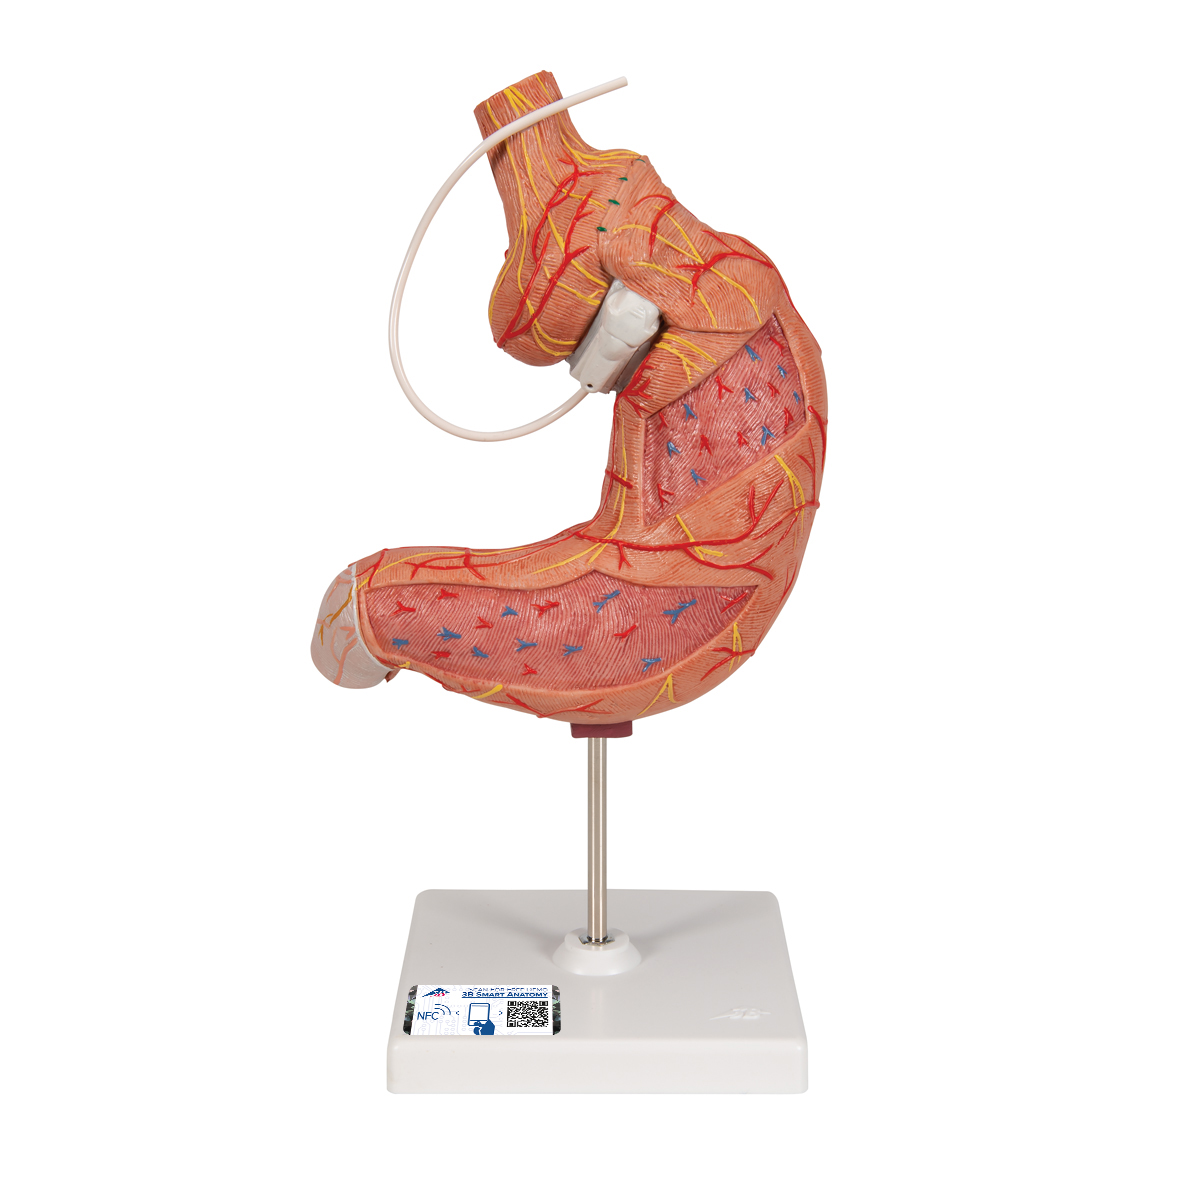 Human Stomach Model With Gastric Band 2 Part 3b Smart Anatomy